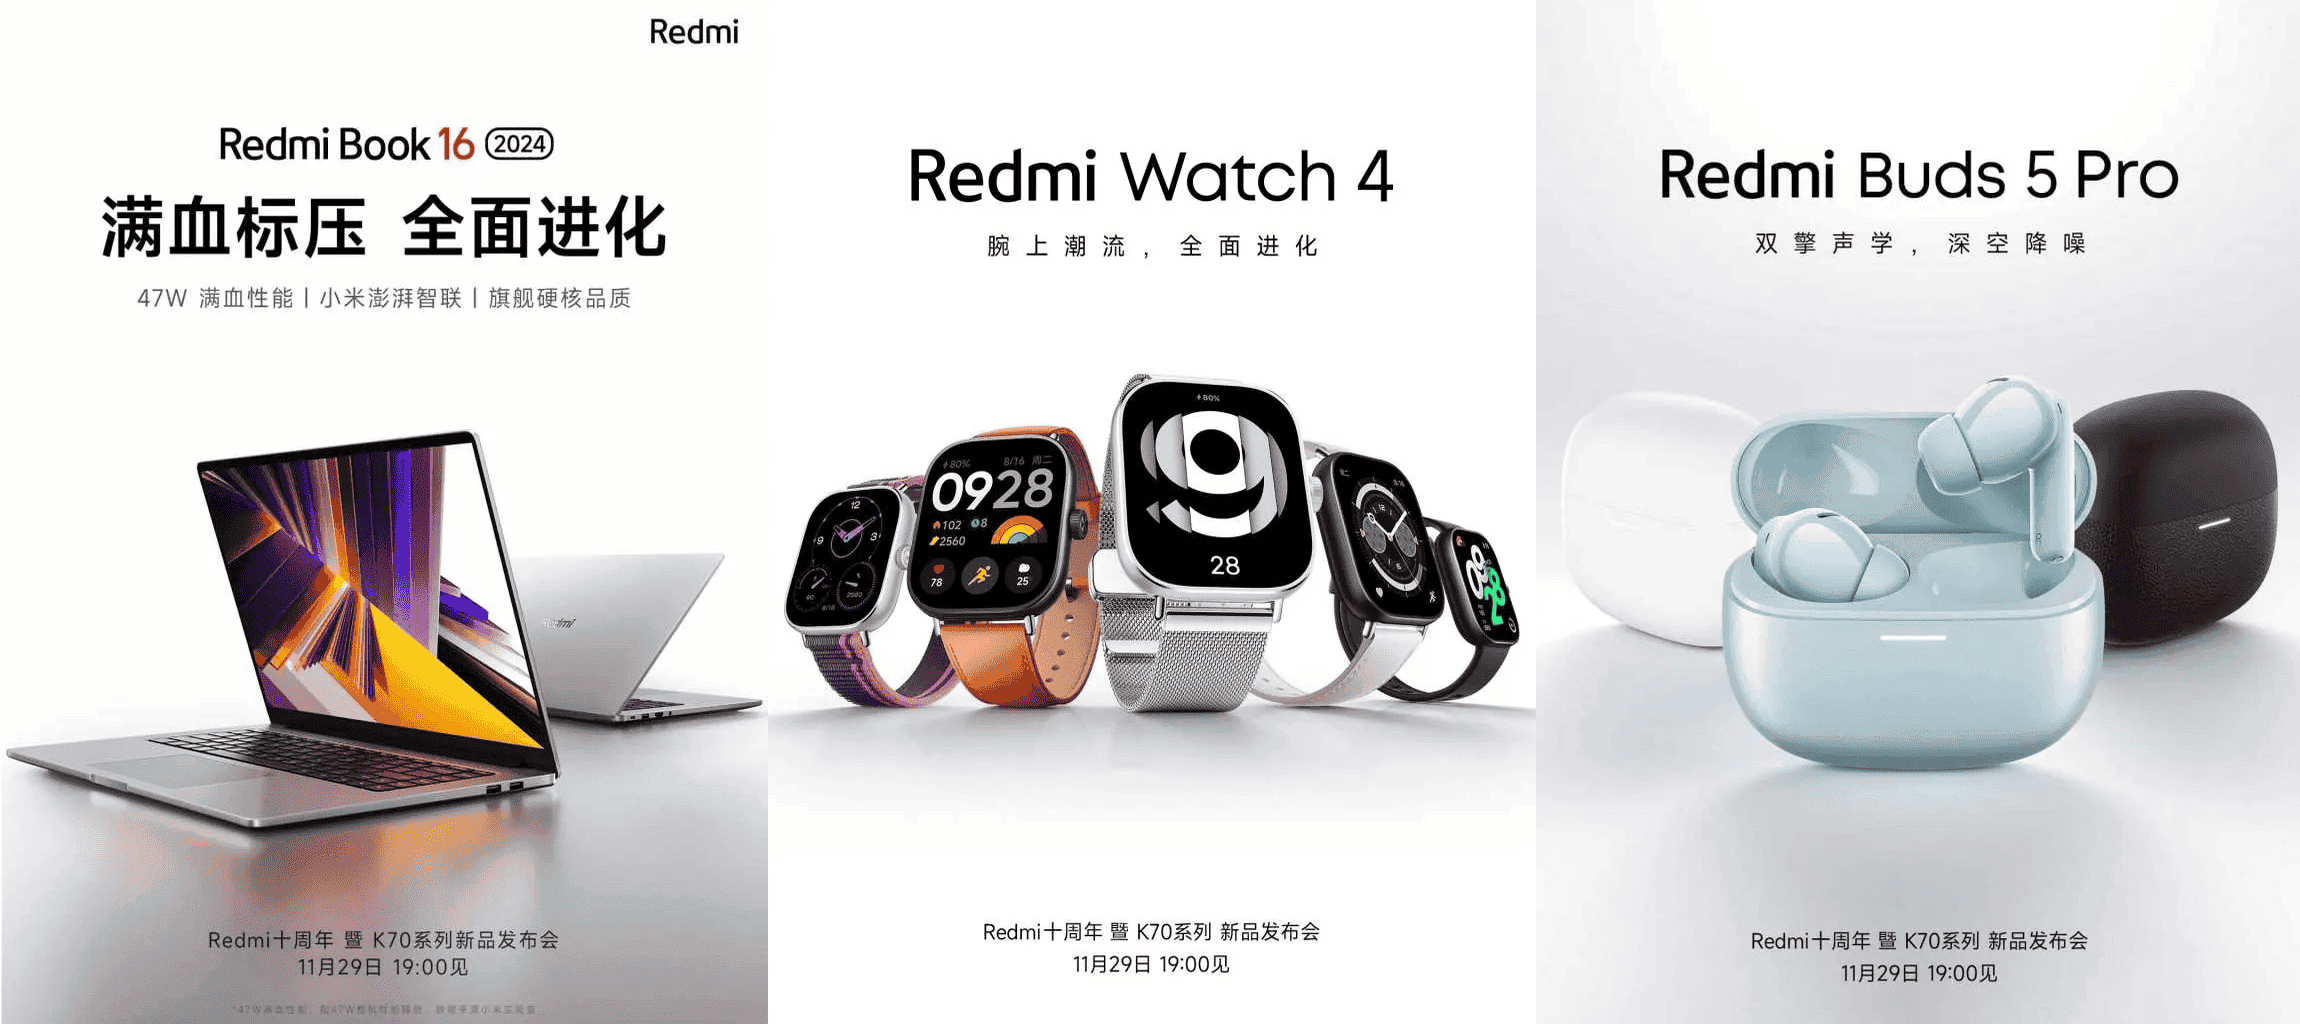 Redmi Watch 4, Redmi Buds 5 and Buds 5 Pro global launch set for